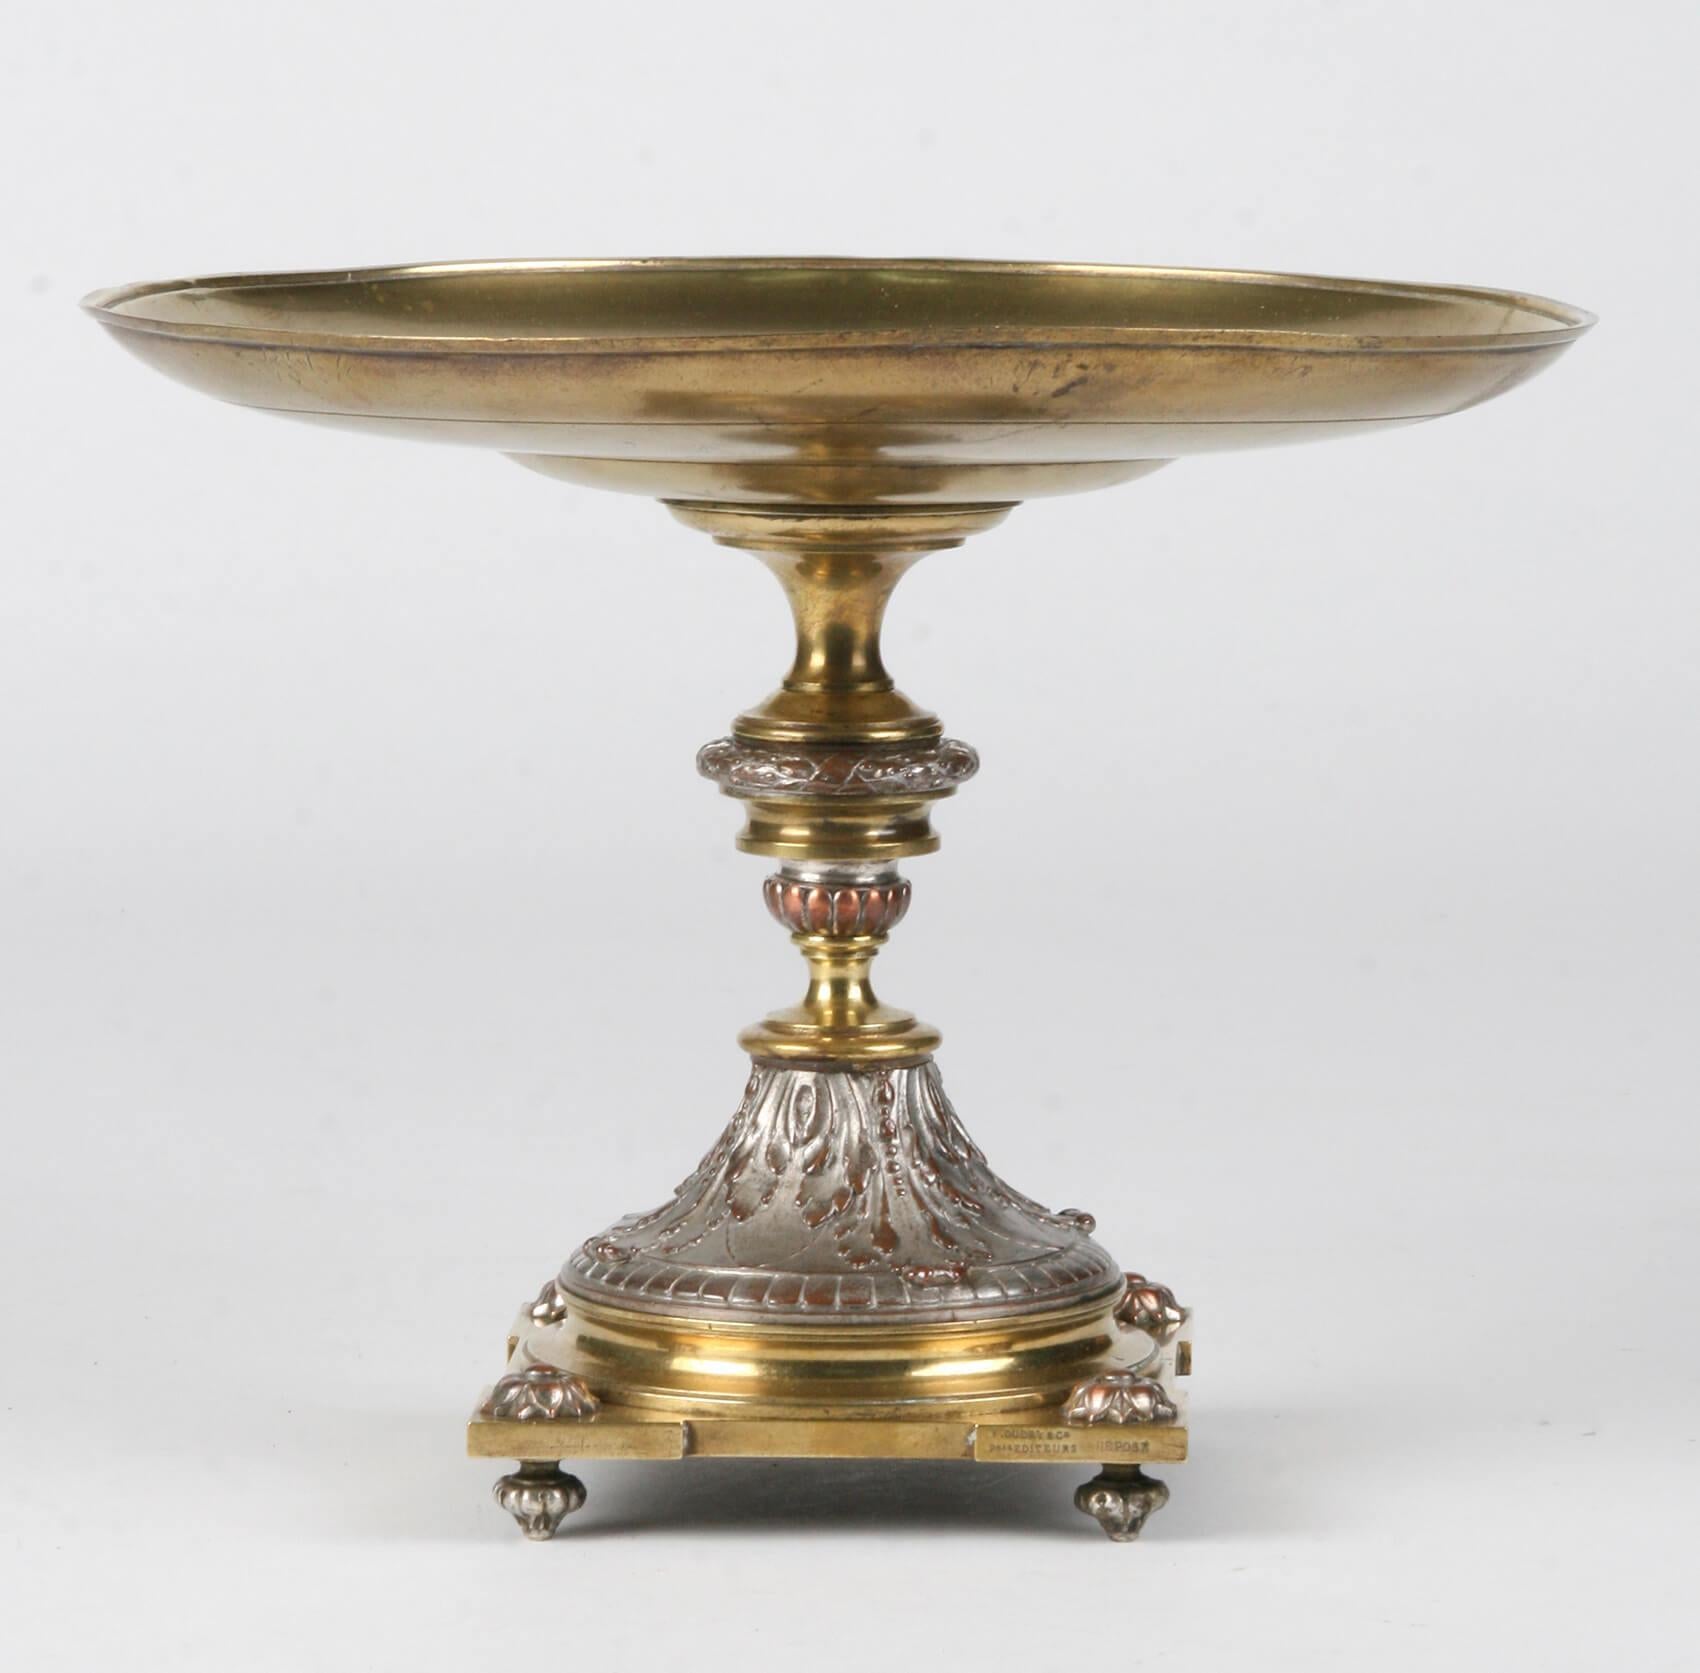 L. Oudry & Cie, gilt metal and bronze Tazza, with raised cupid, insect, floral, leaf and scroll decoration on turned stem with square base having further turned feet, 26.5 cm diameter, 21 cm high. It is signed by Leopold Oudry, famous bronze maker